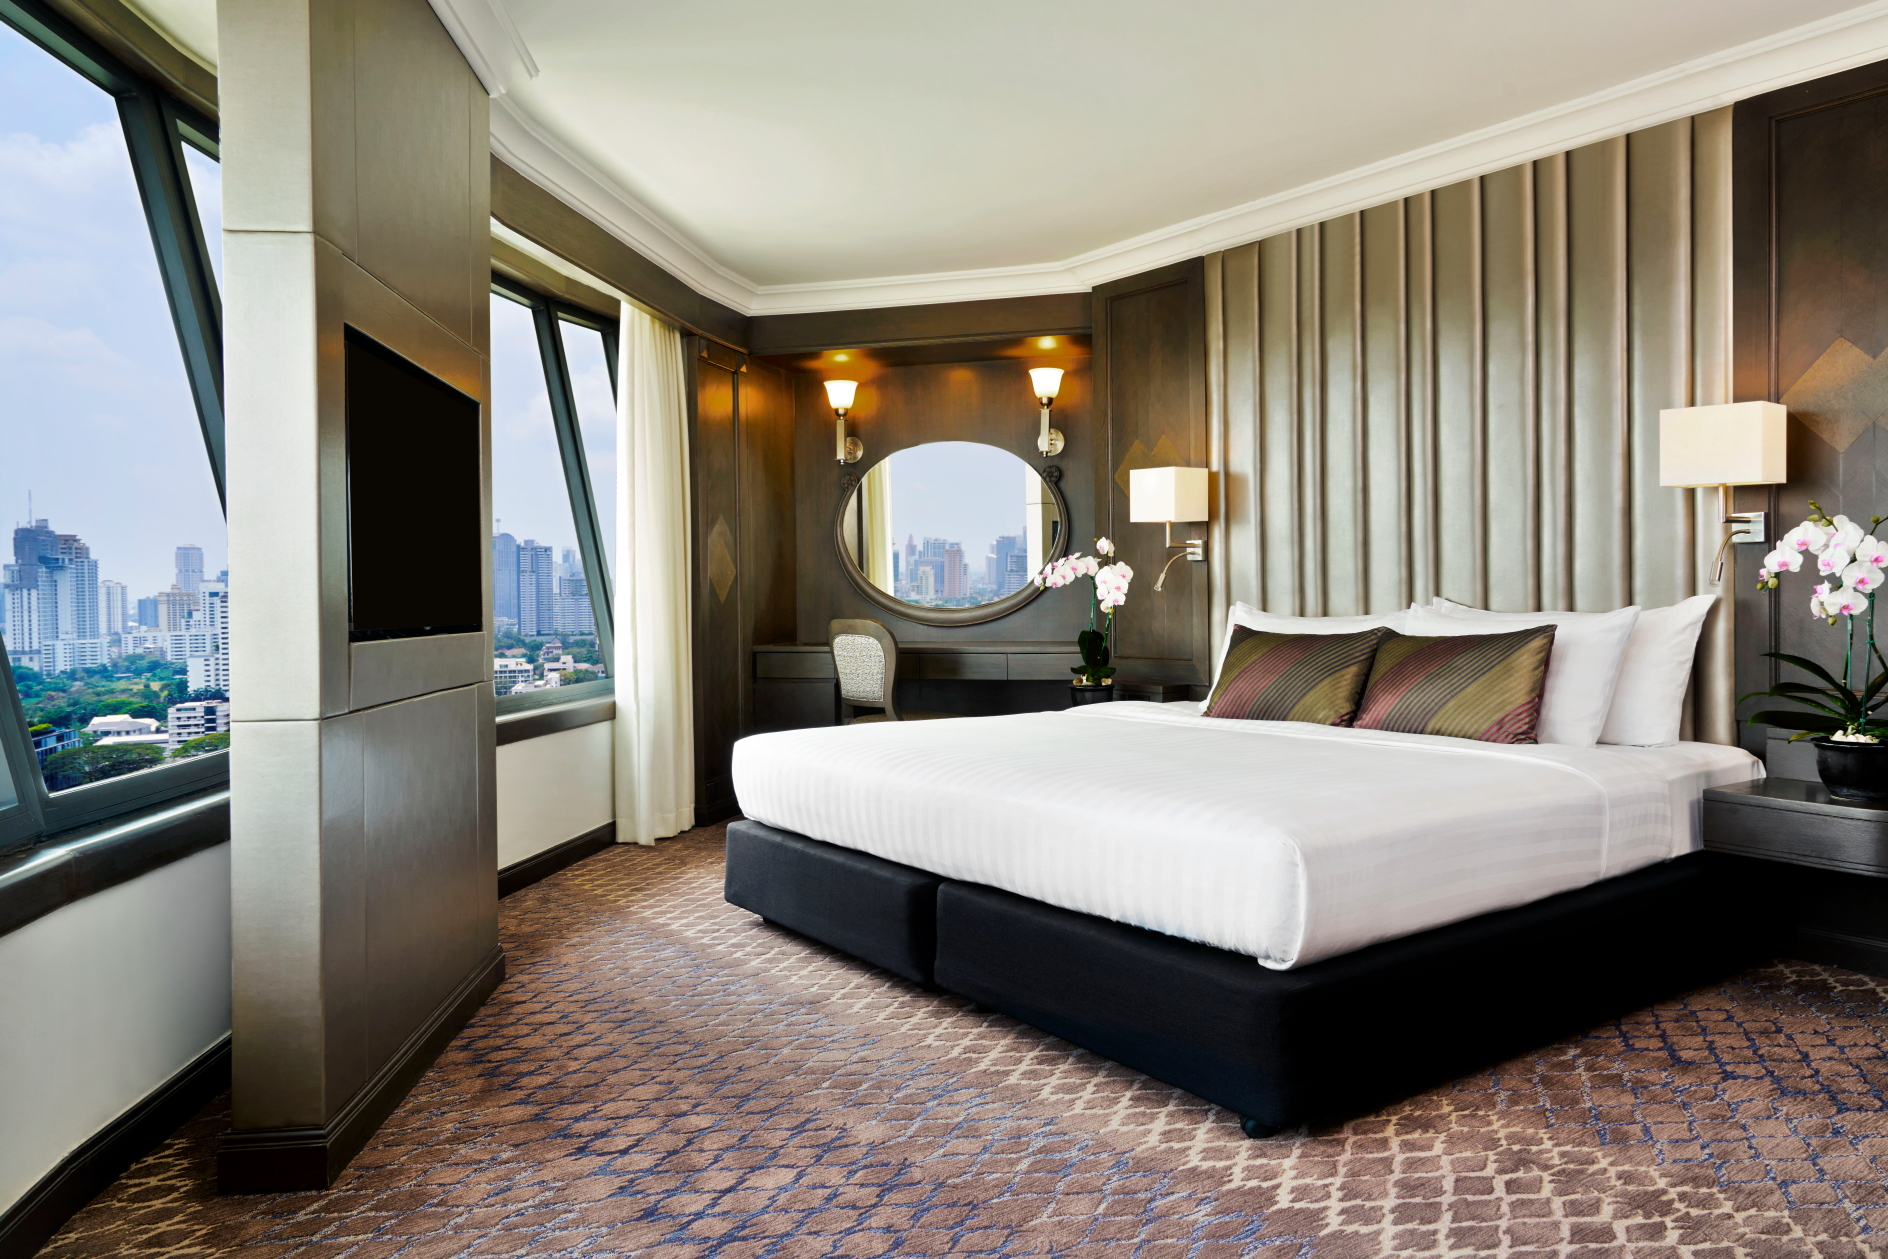 Executive Suite at the Grand Mercure Bangkok Atrium in Thailand. Click to enlarge.